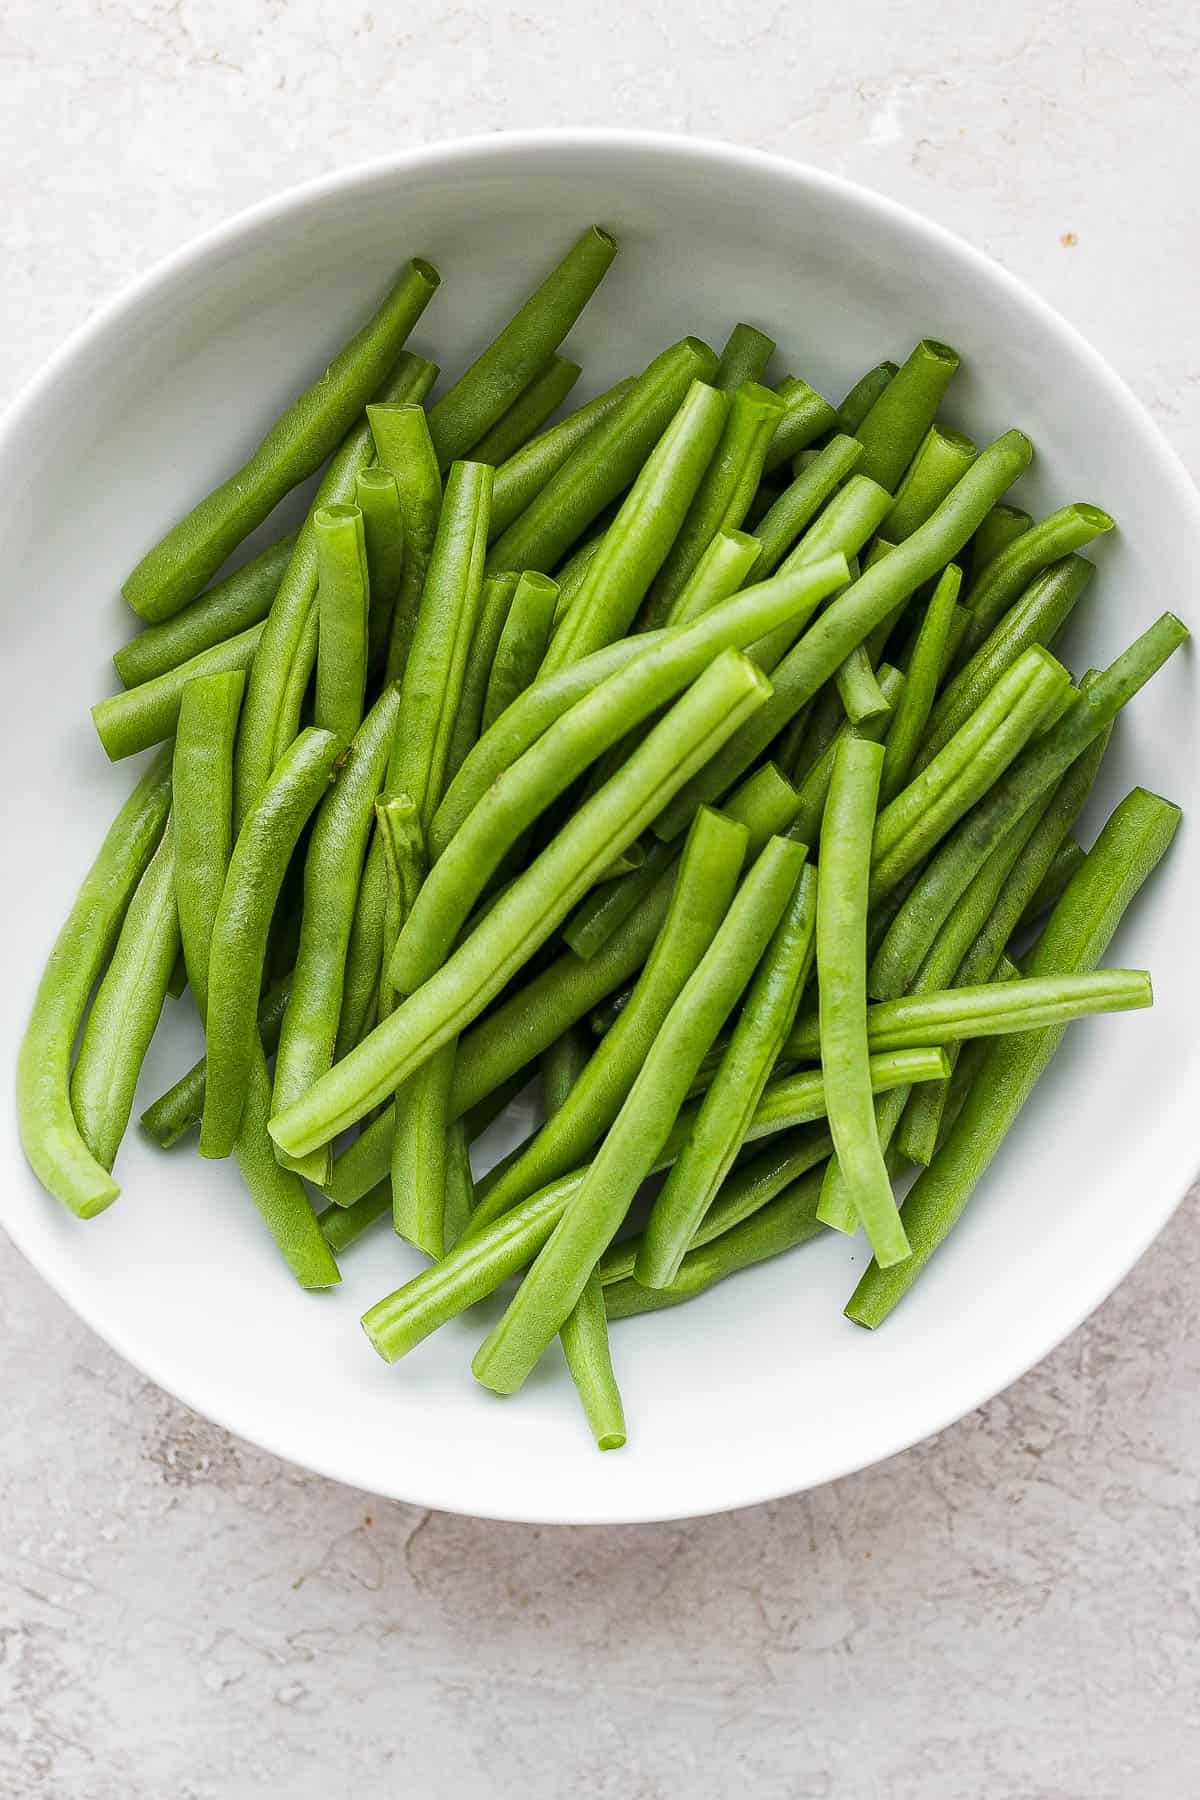 Clean and trimmed green beans on a plate.